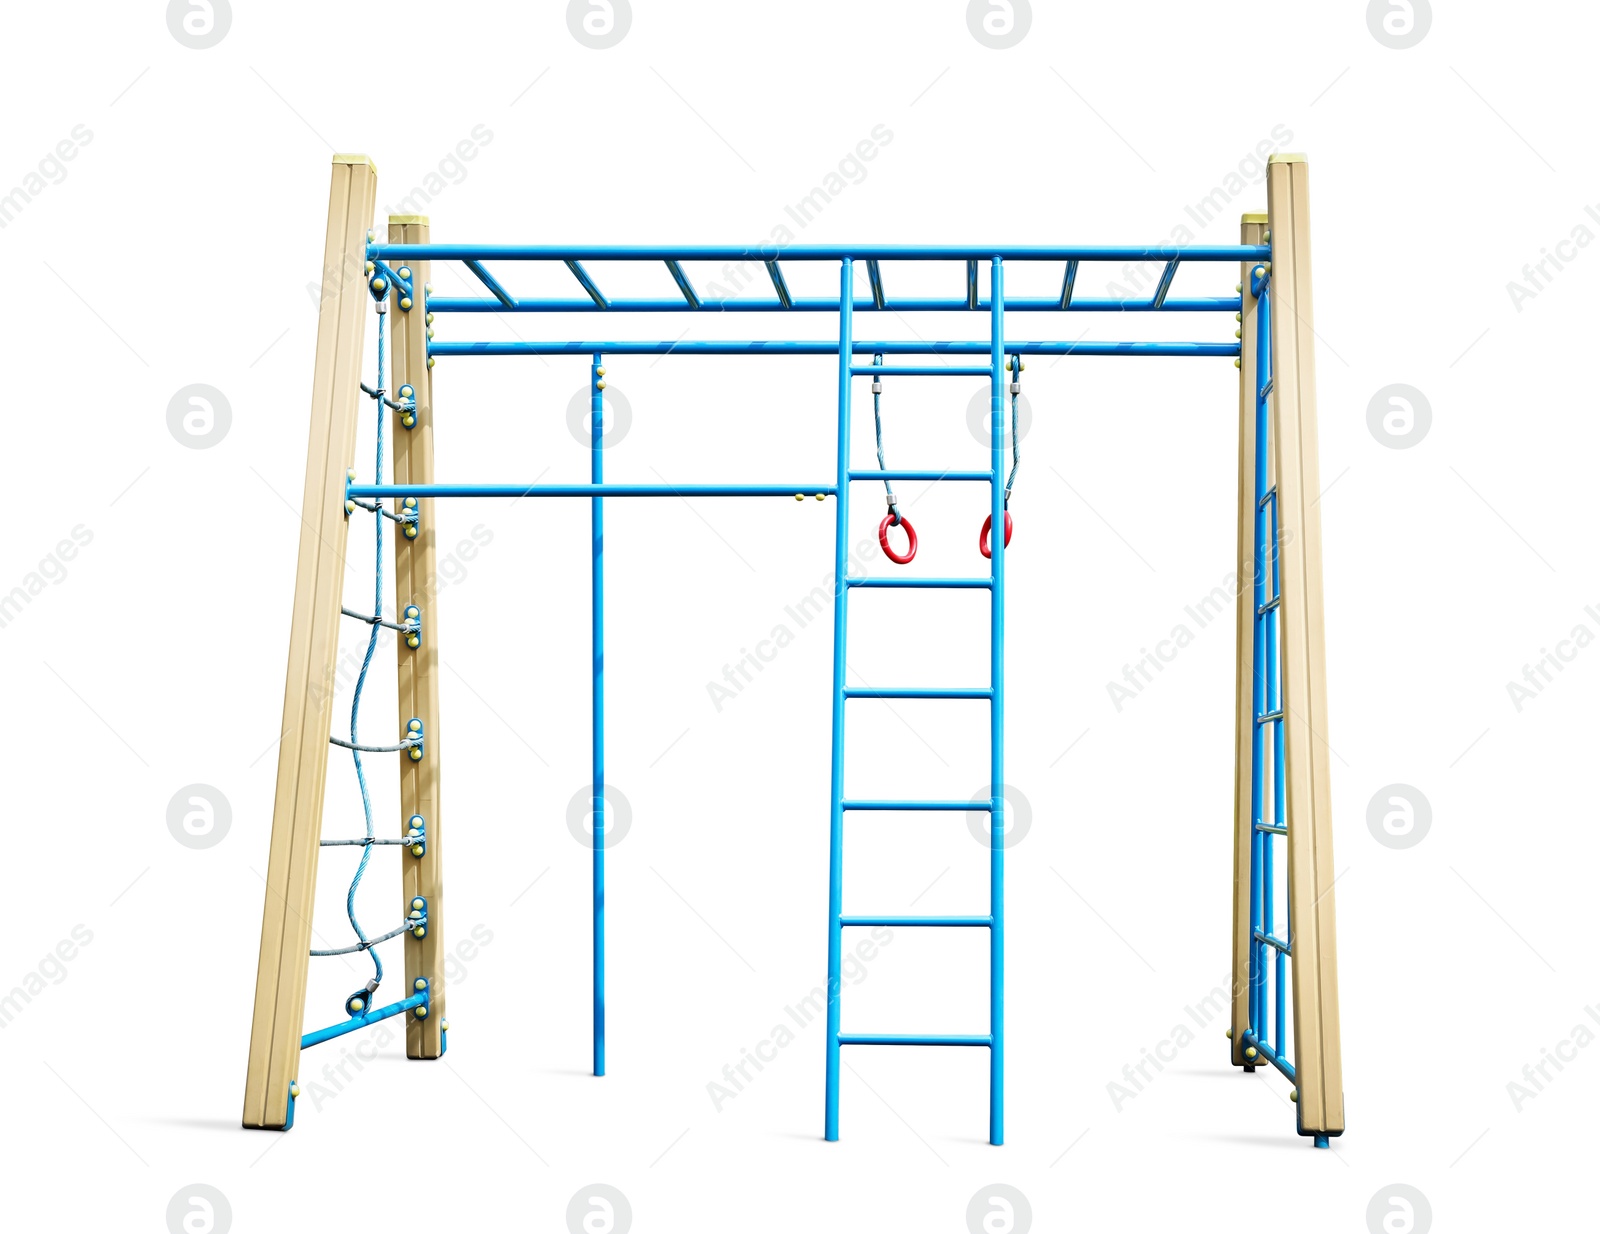 Image of Jungle gym isolated on white. Modern playground equipment